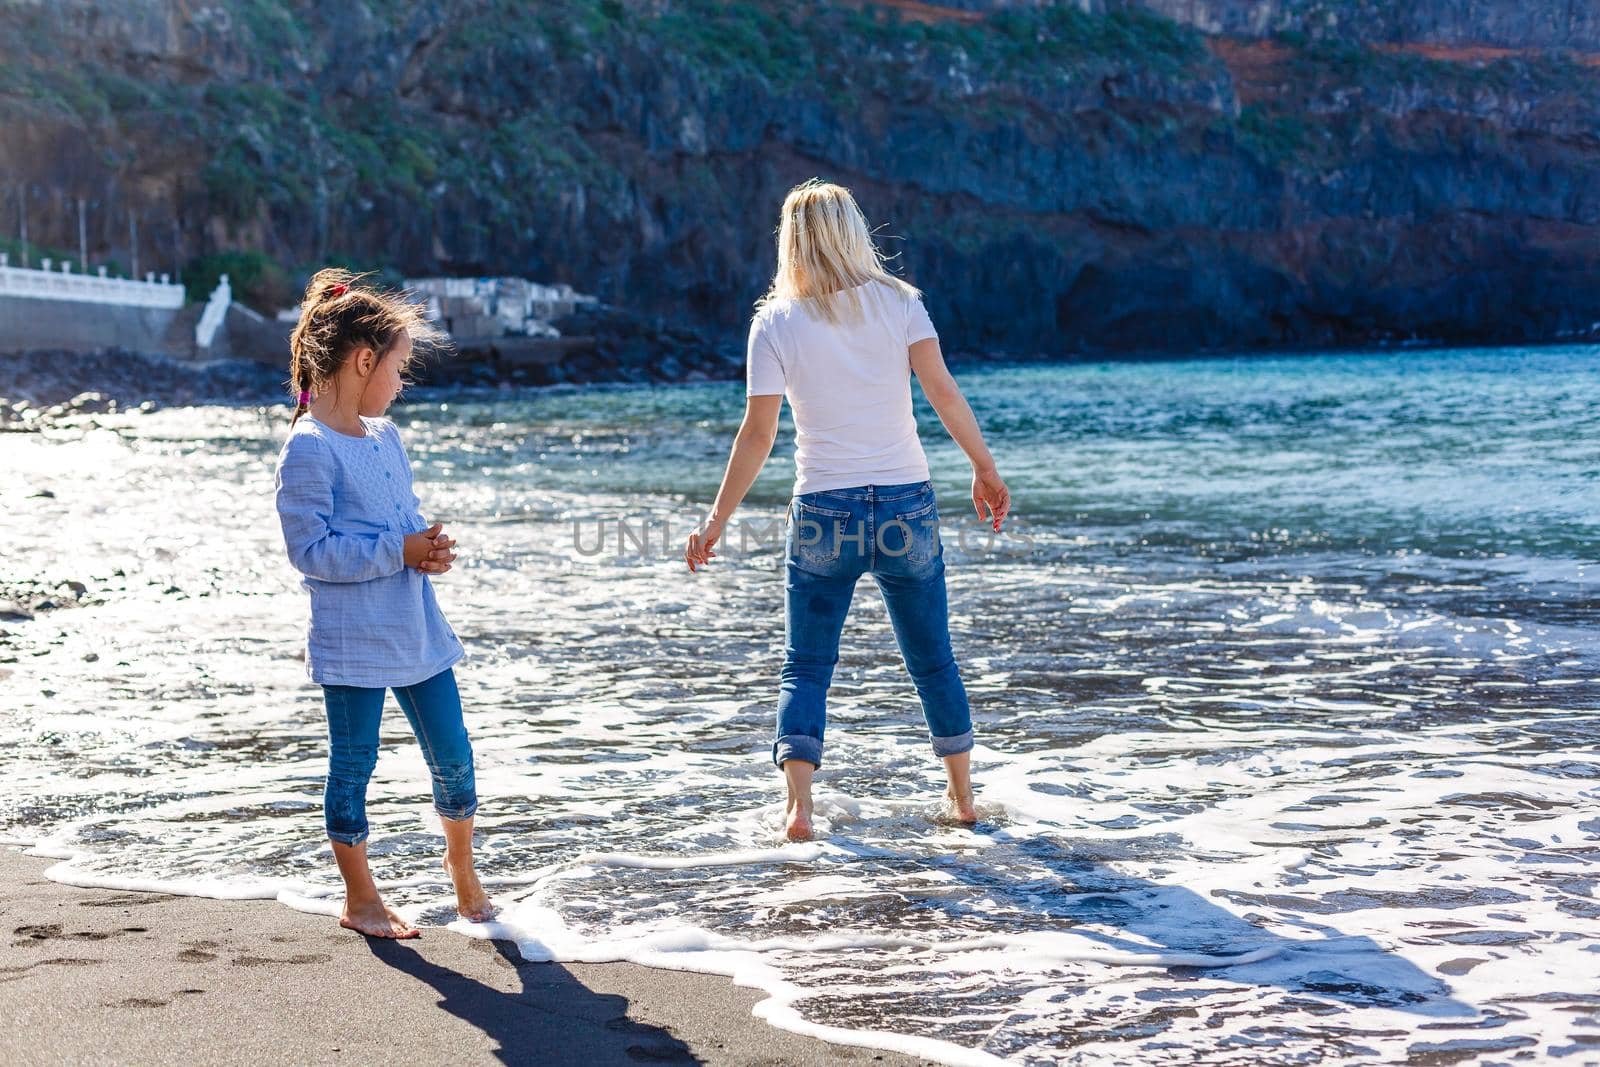 Family holiday on Tenerife, Spain. Mother with children outdoors on ocean. Portrait travel tourists - mom with kids. Positive human emotions, active lifestyles. Happy young family on sea beach